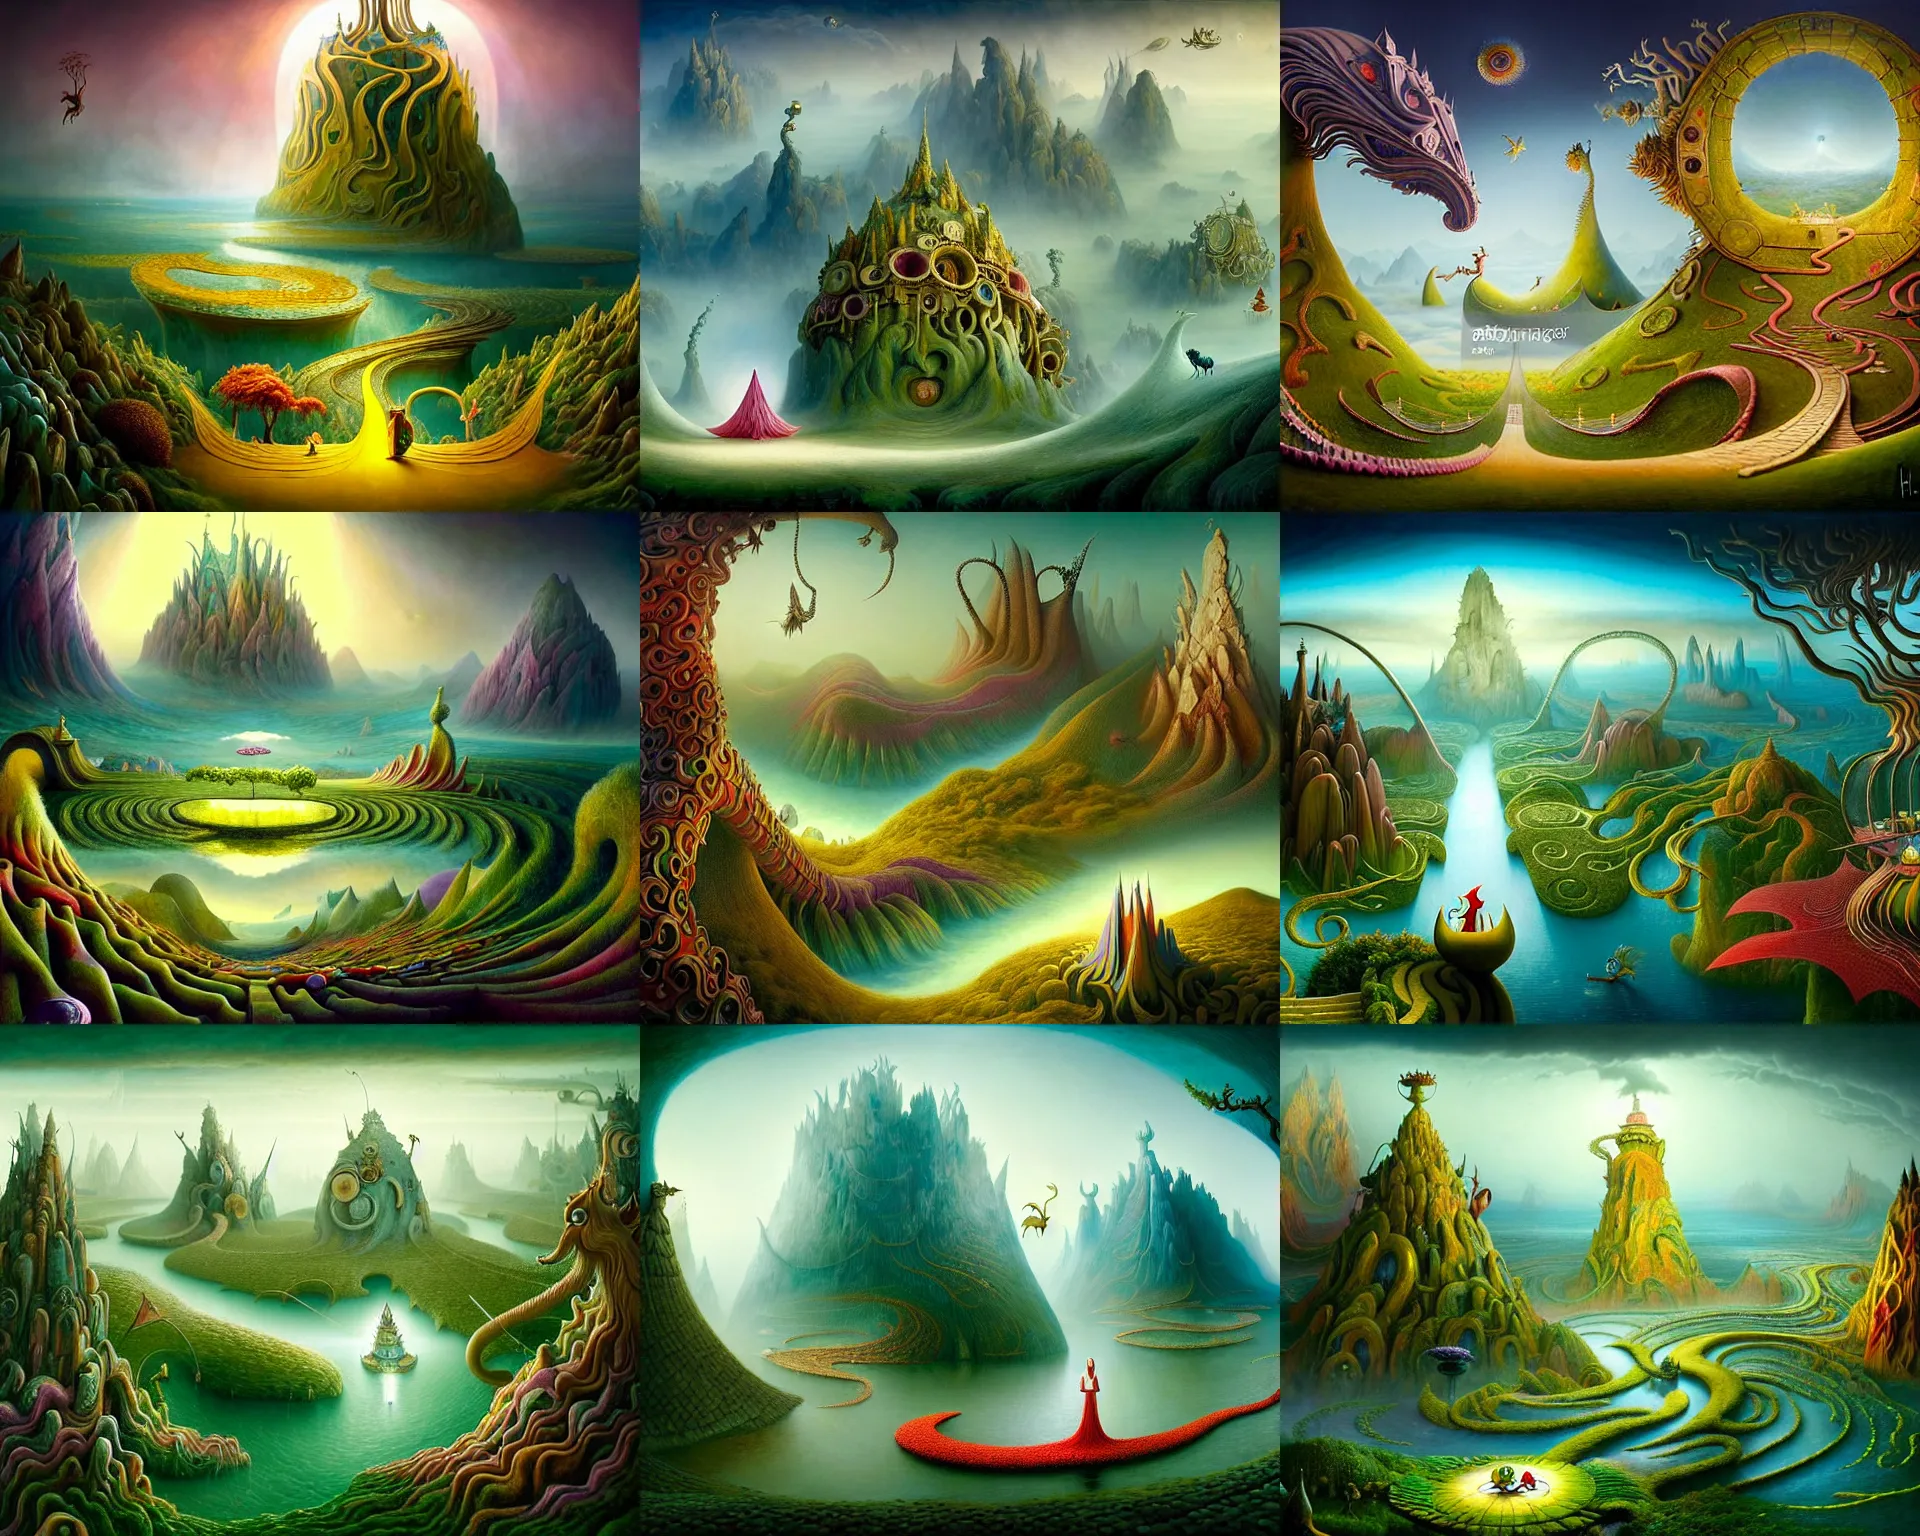 Prompt: a beguiling epic stunning beautiful and insanely detailed matte painting of traveling the impossible winding path through a dream world with surreal architecture designed by Heironymous Bosch, mythical whimsical creatures, mega structures inspired by Heironymous Bosch's Garden of Earthly Delights, vast surreal landscape and horizon by Cyril Rolando and Andrew Ferez and Mike Azevedo, masterpiece!!!, grand!, imaginative!!!, whimsical!!, epic scale, intricate details, sense of awe, elite, wonder, insanely complex, masterful composition!!!, sharp focus, fantasy realism, dramatic lighting